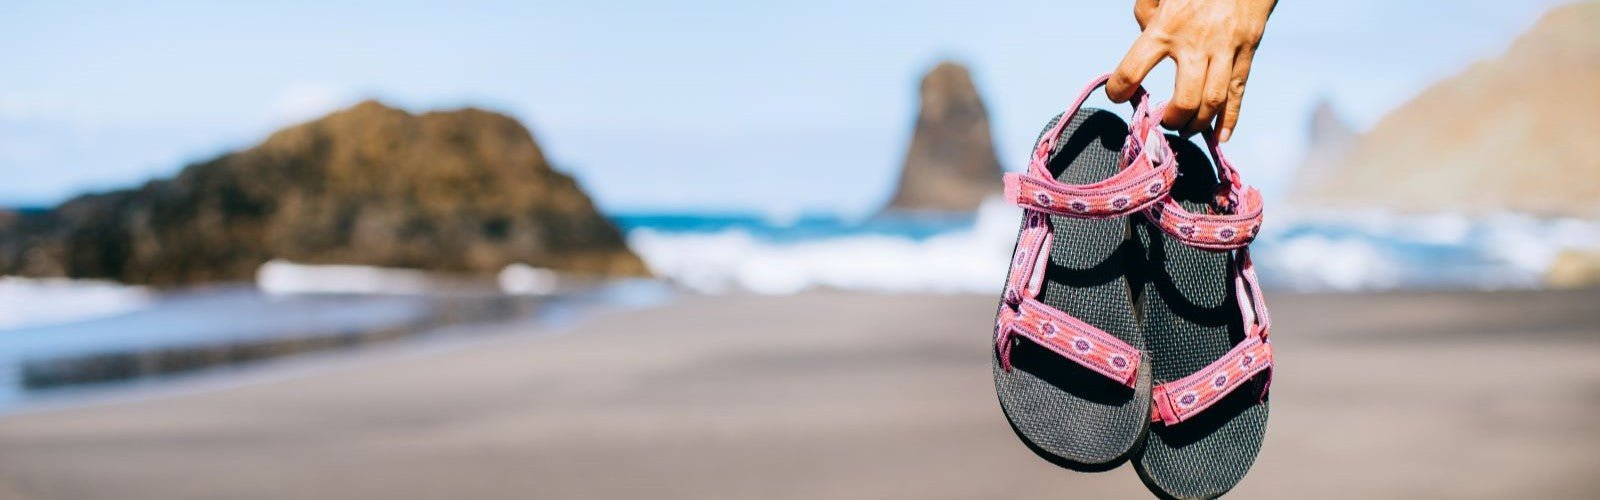 Ultimate Guide to Summer Sandals: Reviews and Recommendations - Next Adventure